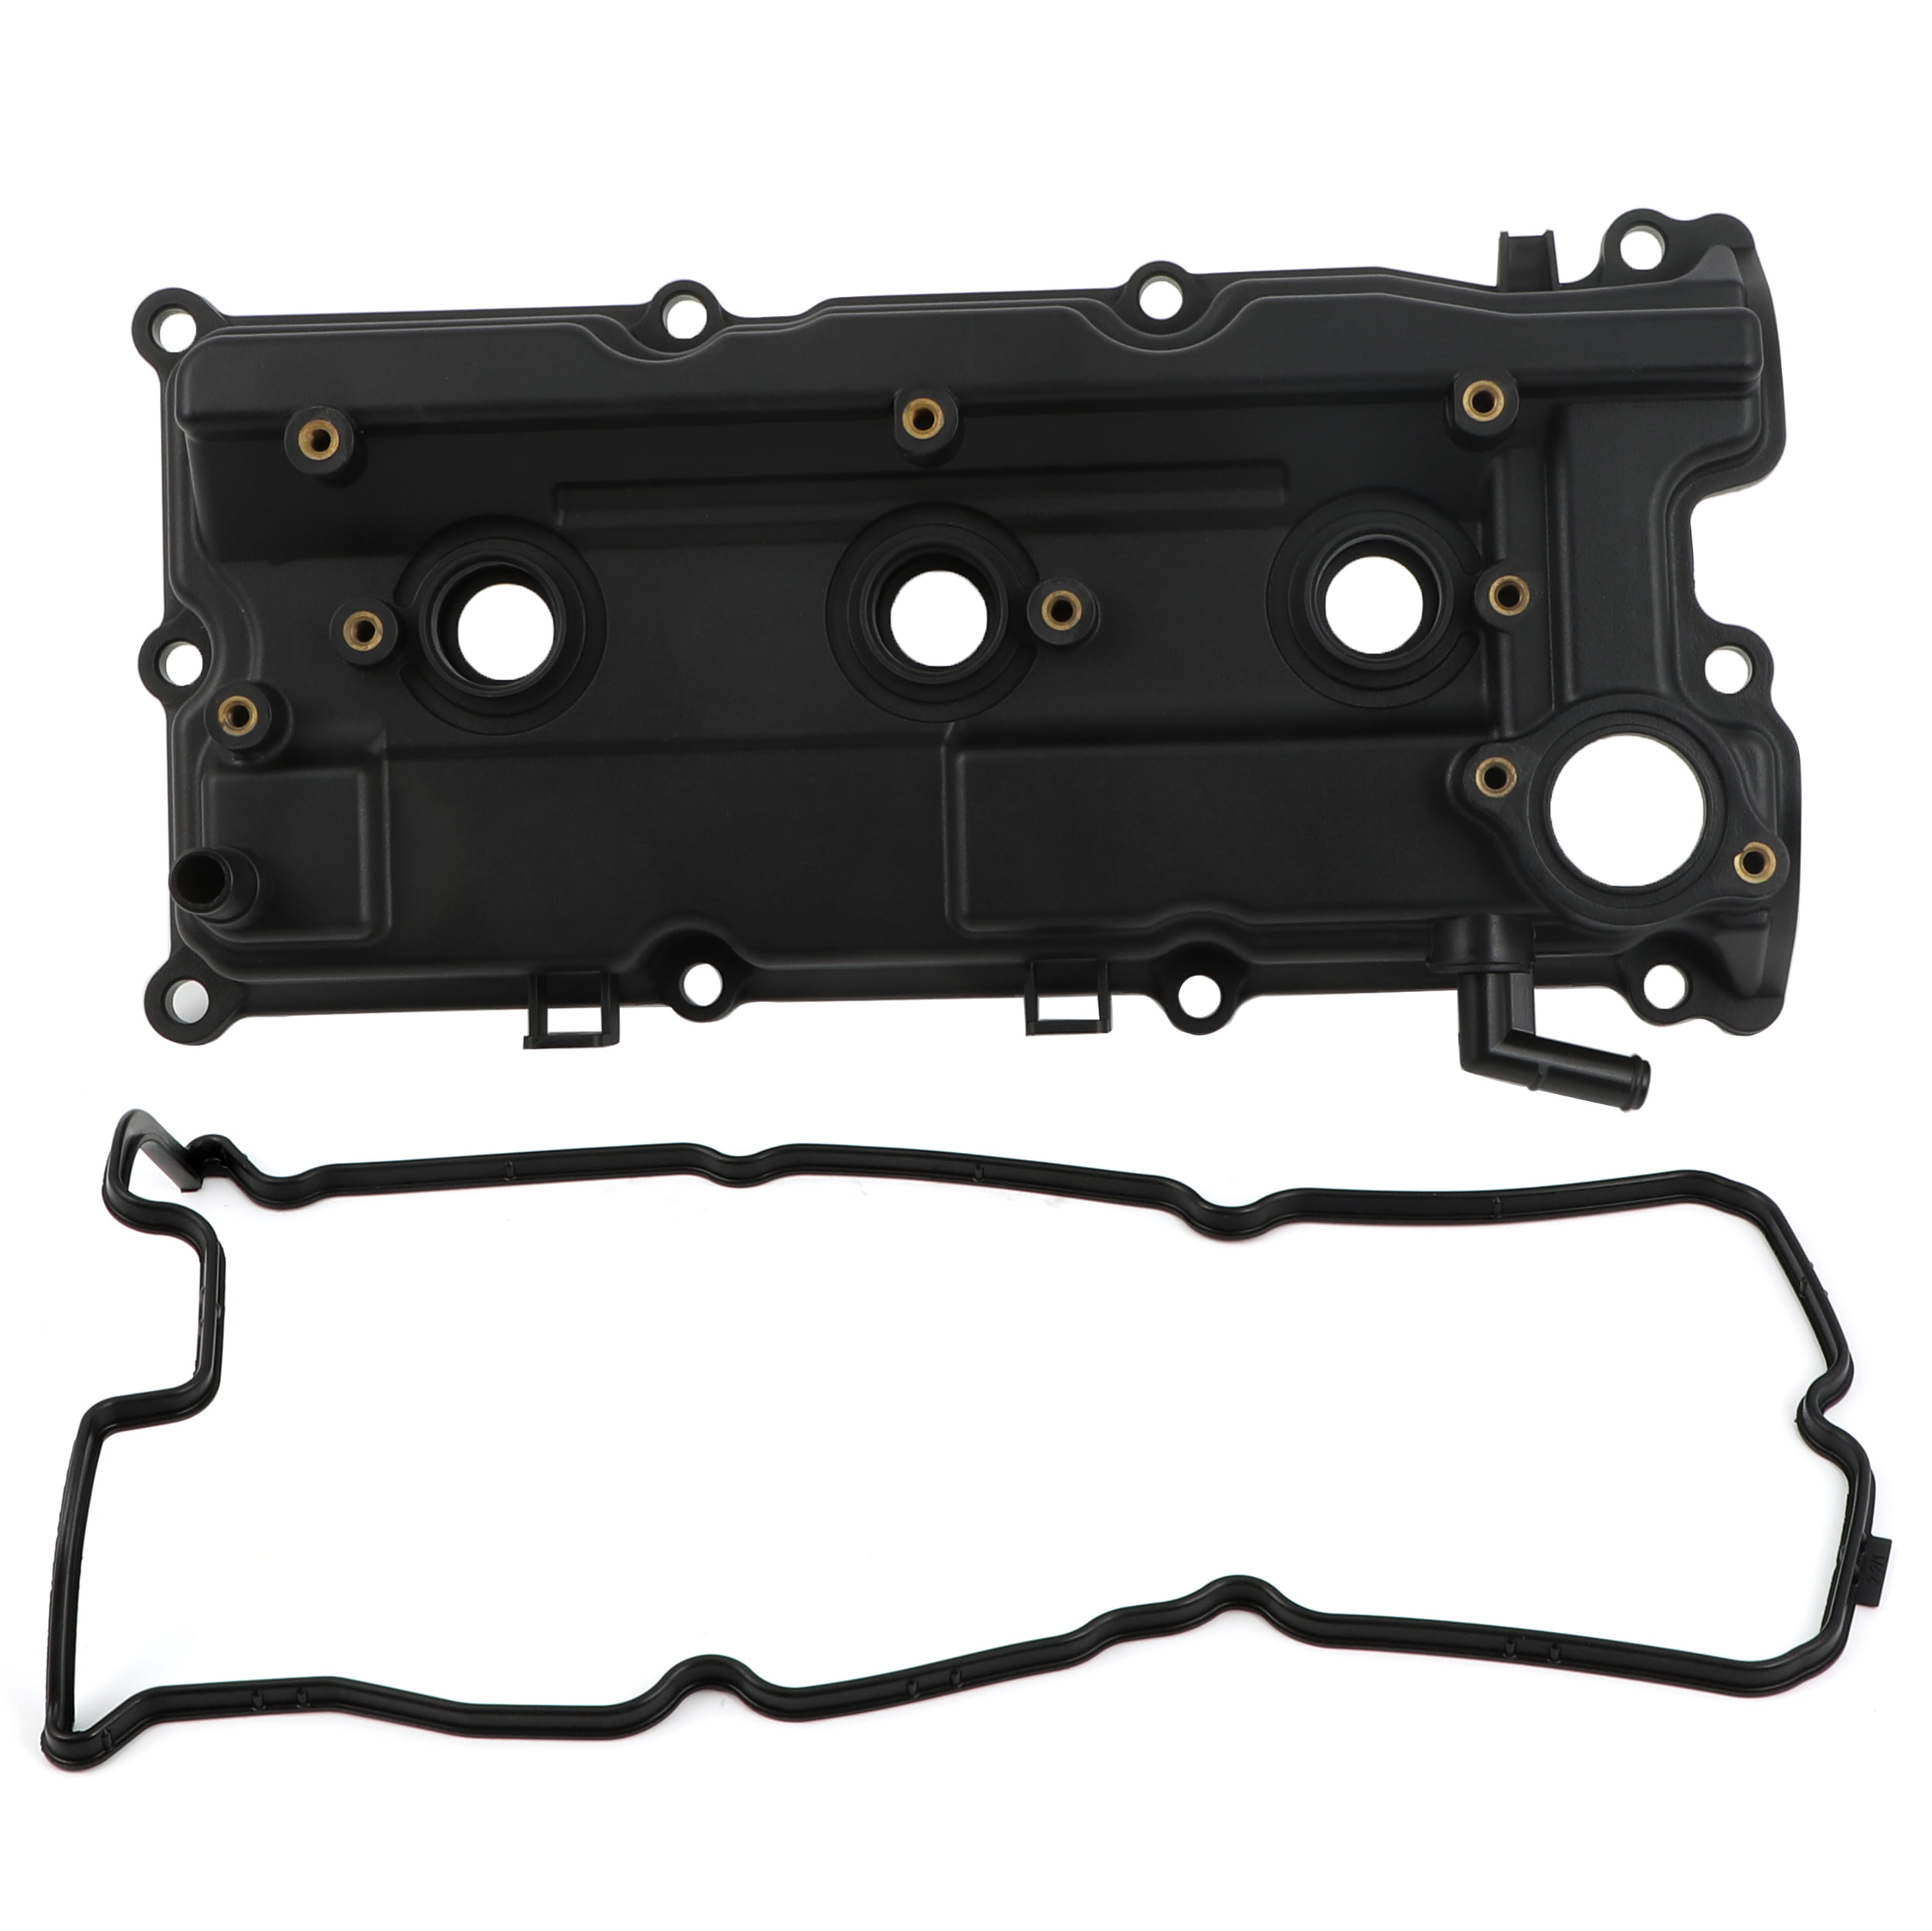 ECCPP Valve Cover with Valve Cover Gasket for 2002-2004 for Infiniti QX4  for Nissan Pathfinder Compatible fit for Right Engine Valve Covers Kit 